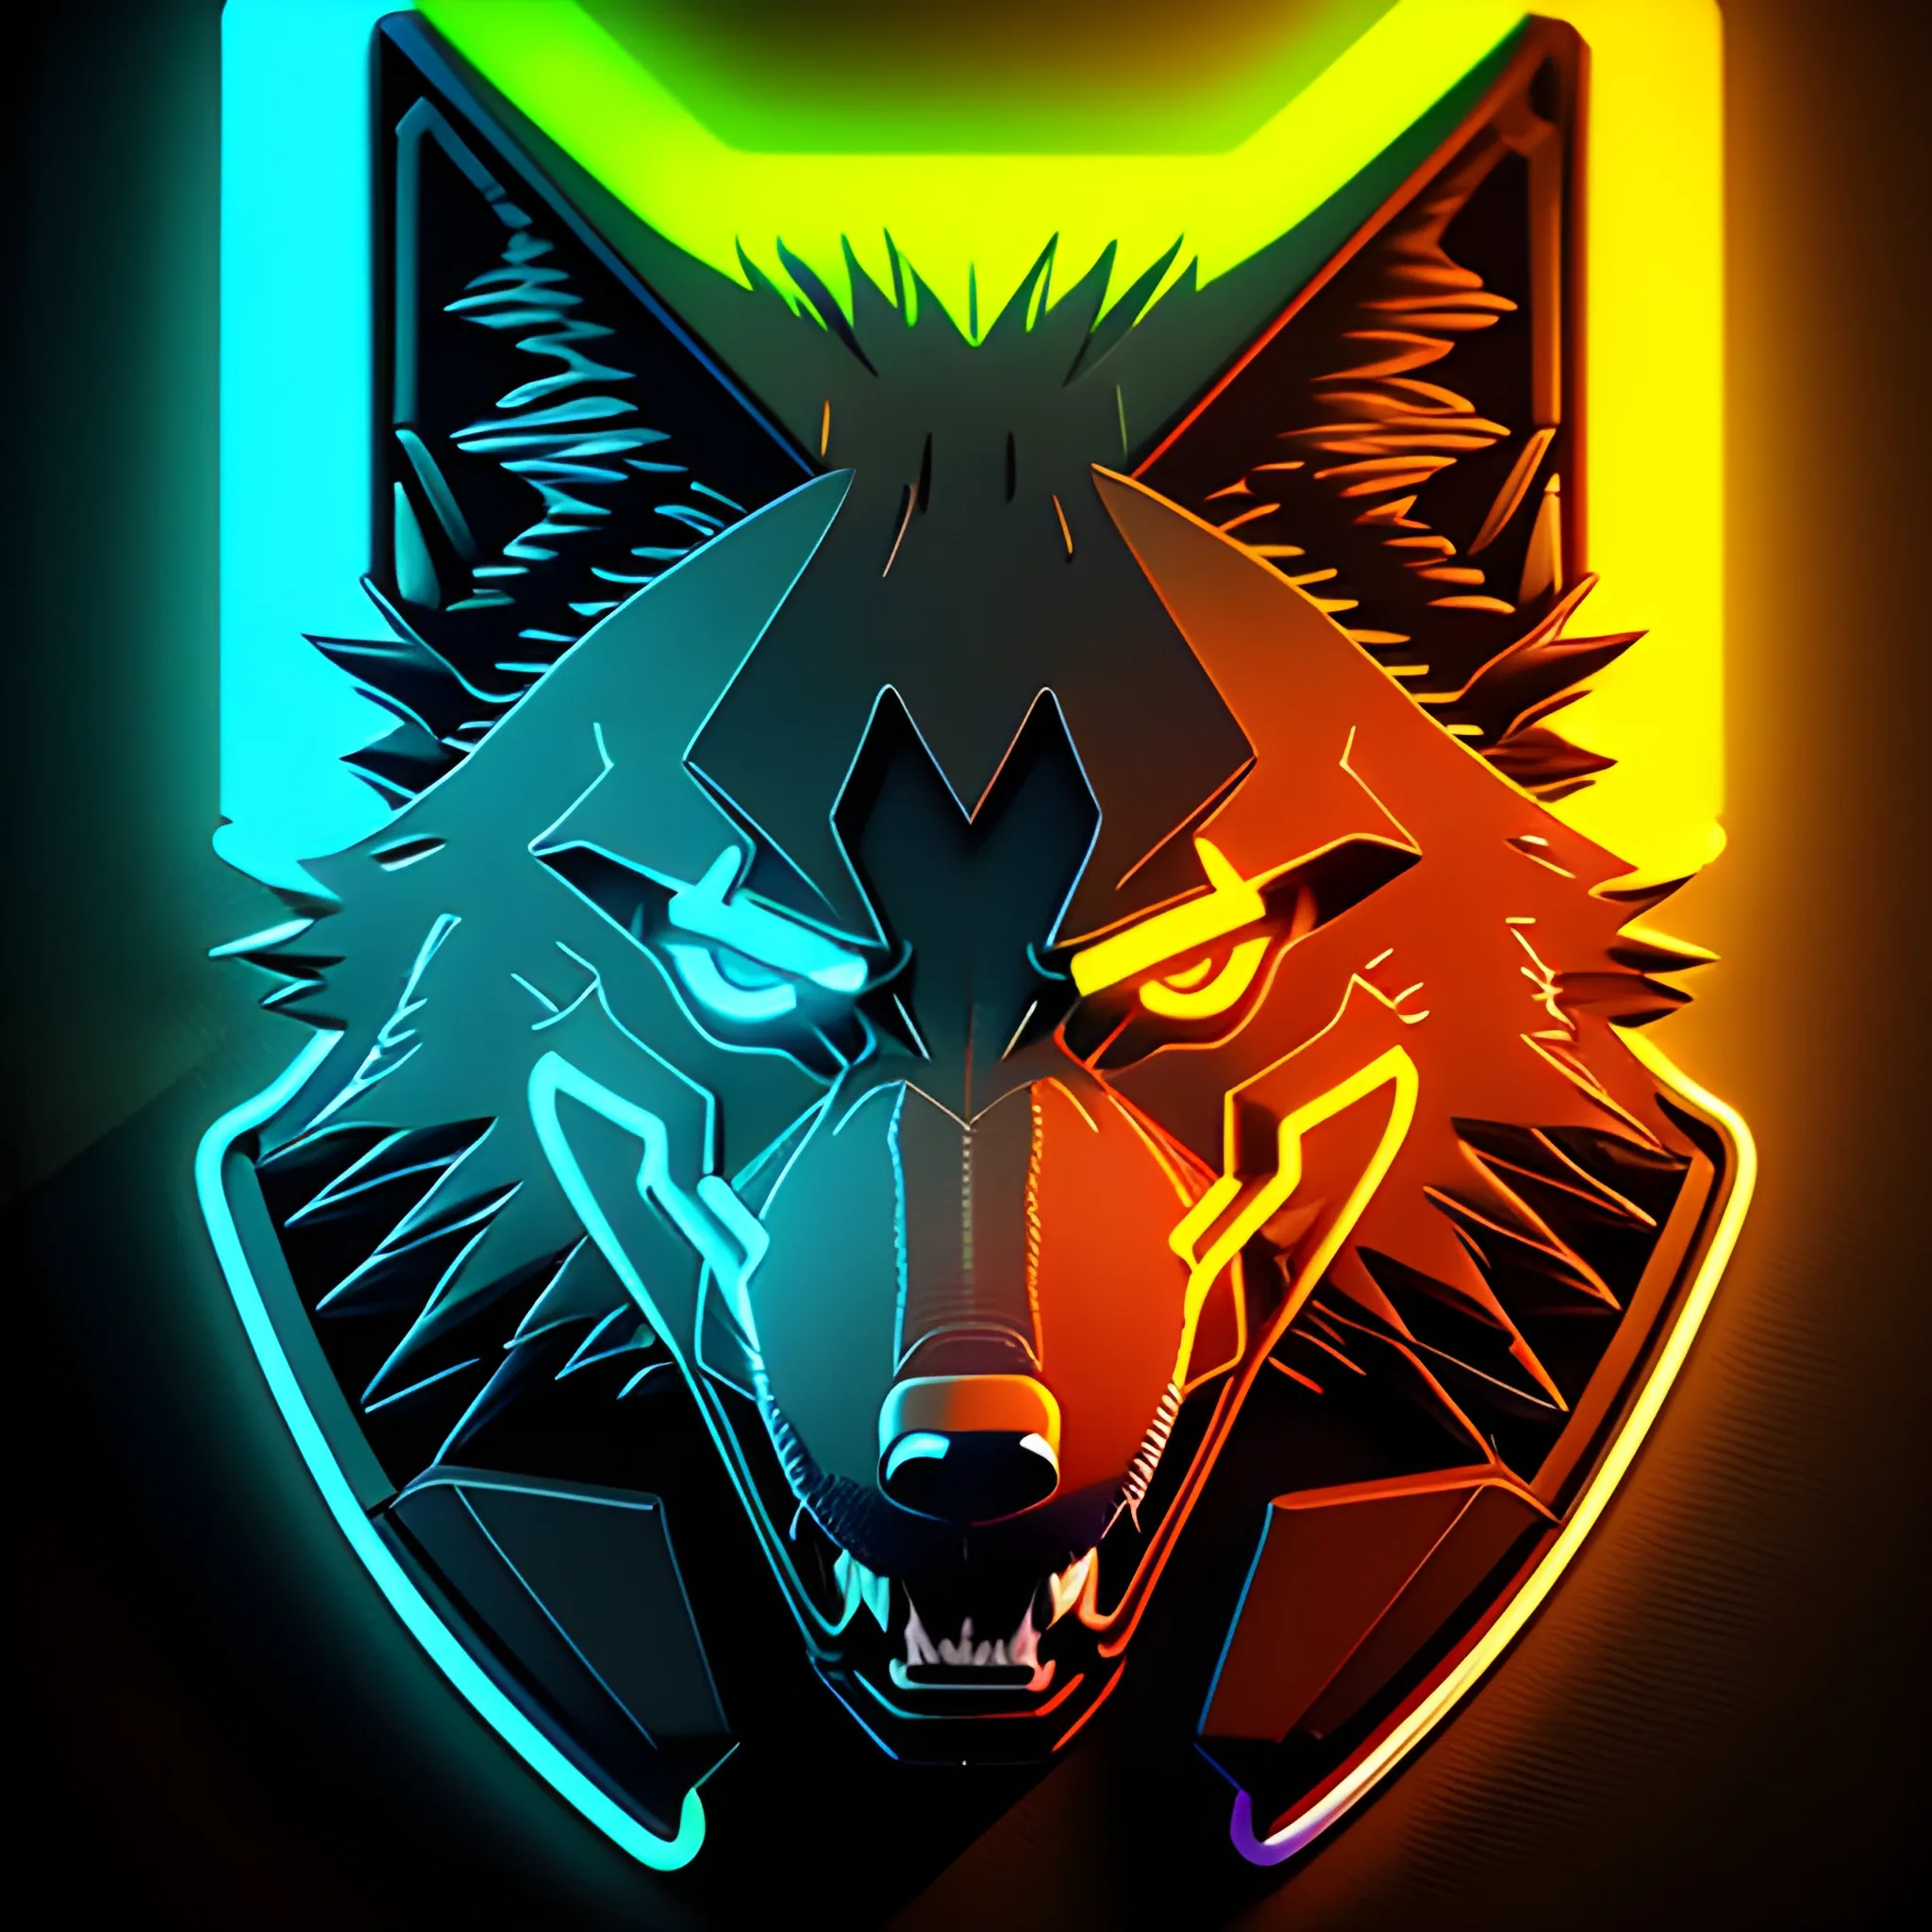 An angry cyberpunk wolf logo, using the yellow neon color, with athe letter "A" at the background, 3D